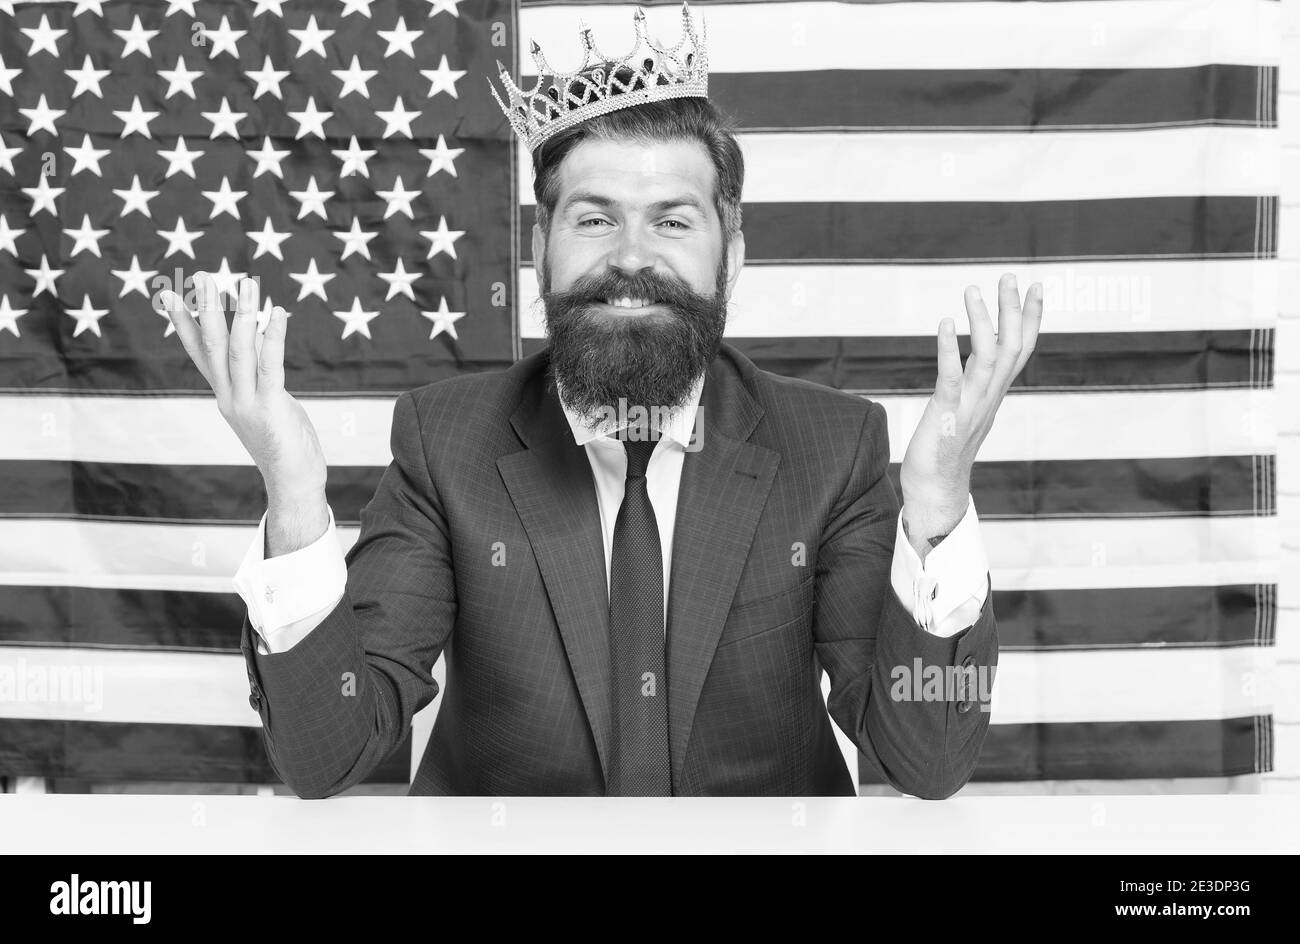 cheerful country leader. selfish male in suit wear crown. victory and freedom. Fourth Of July US Independence Day. Statue of Liberty. bearded man usa parliament representative. Patriotic spirit. Stock Photo